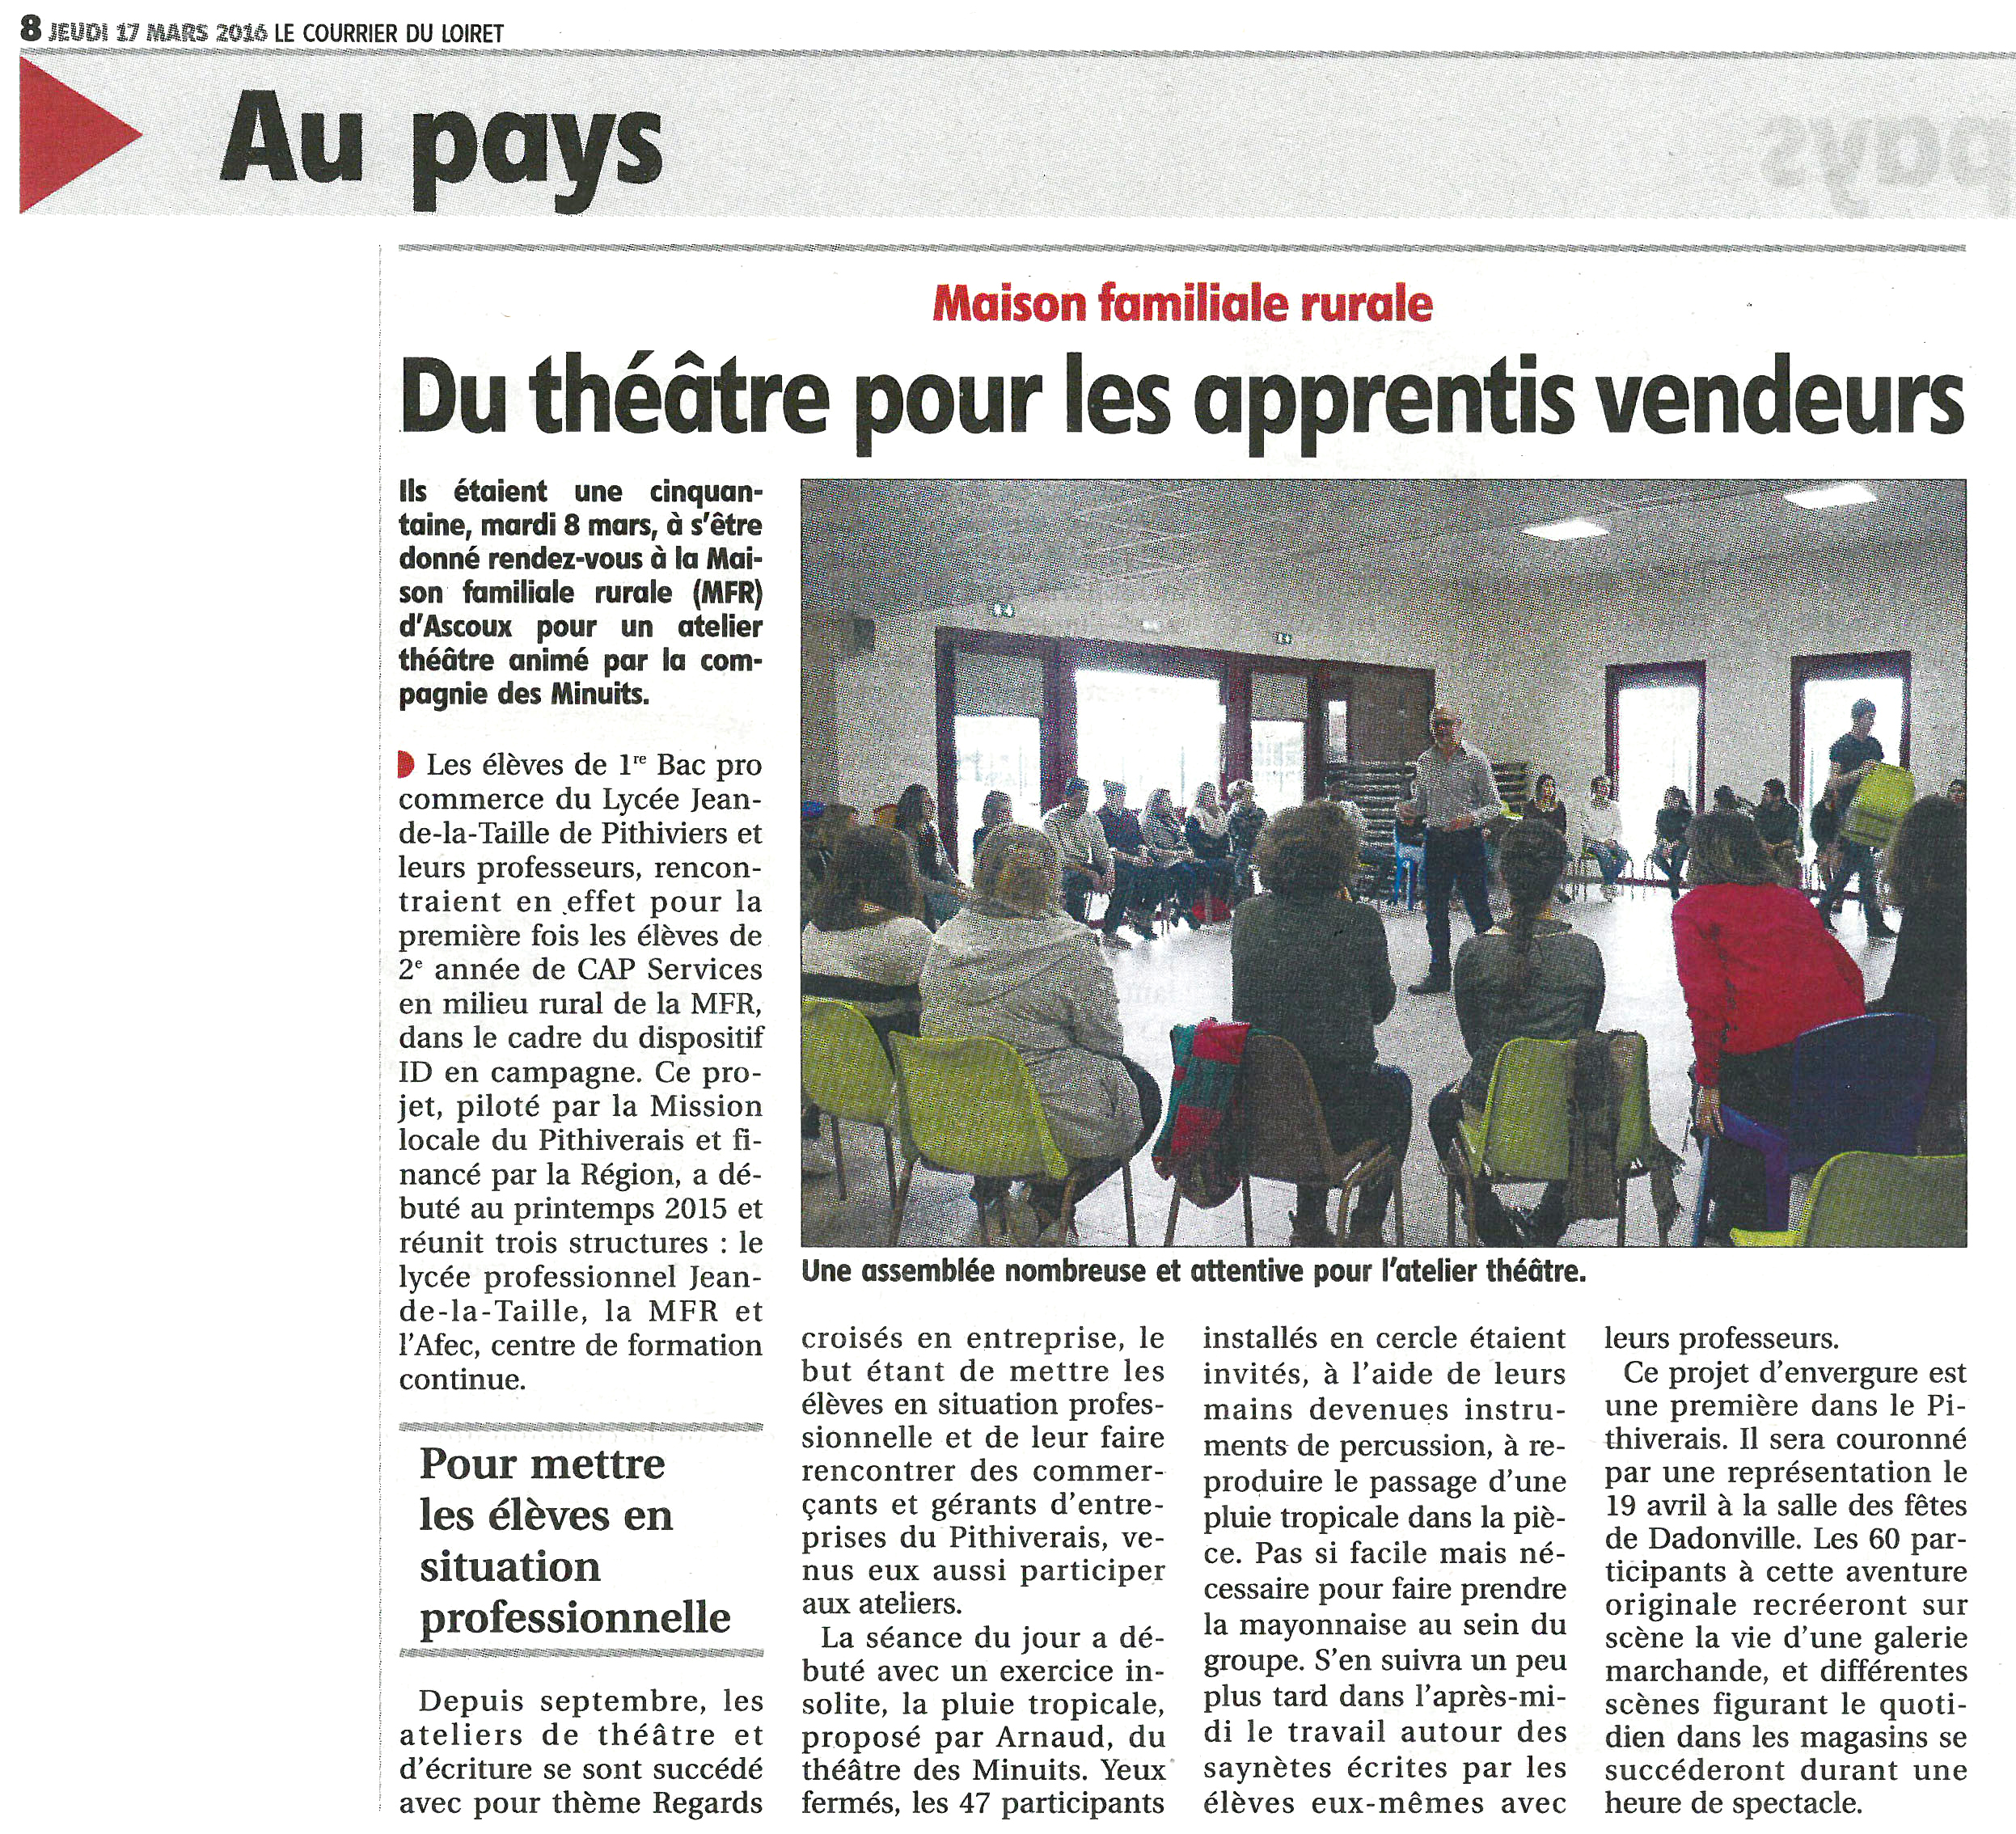 article-courrier-galerie-mfr